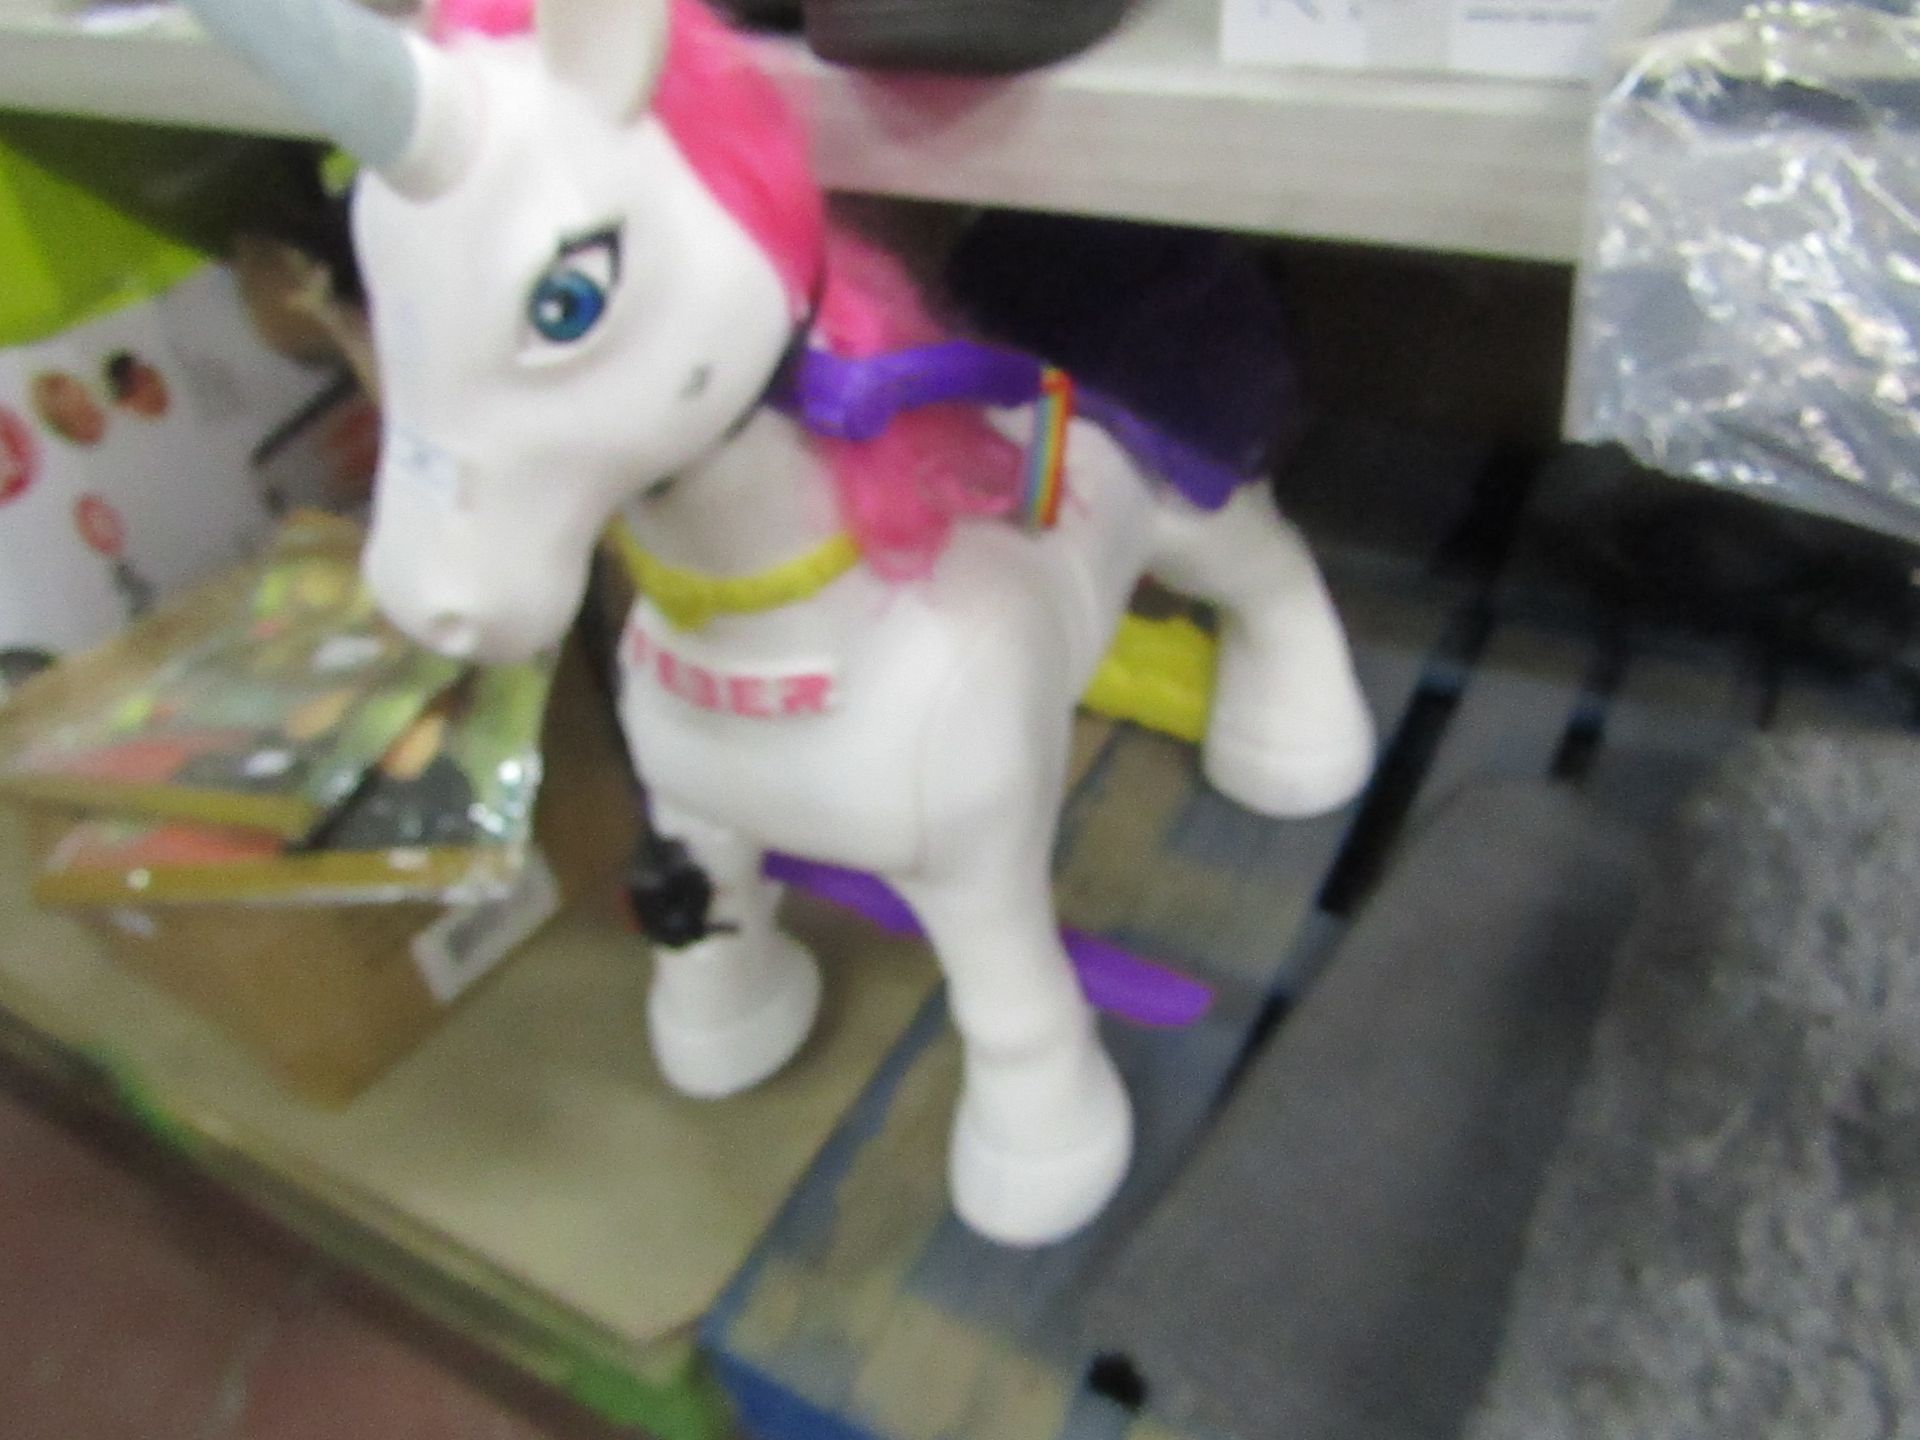 Feber Electric Ride on Unicorn, unchecked, comes with Charger